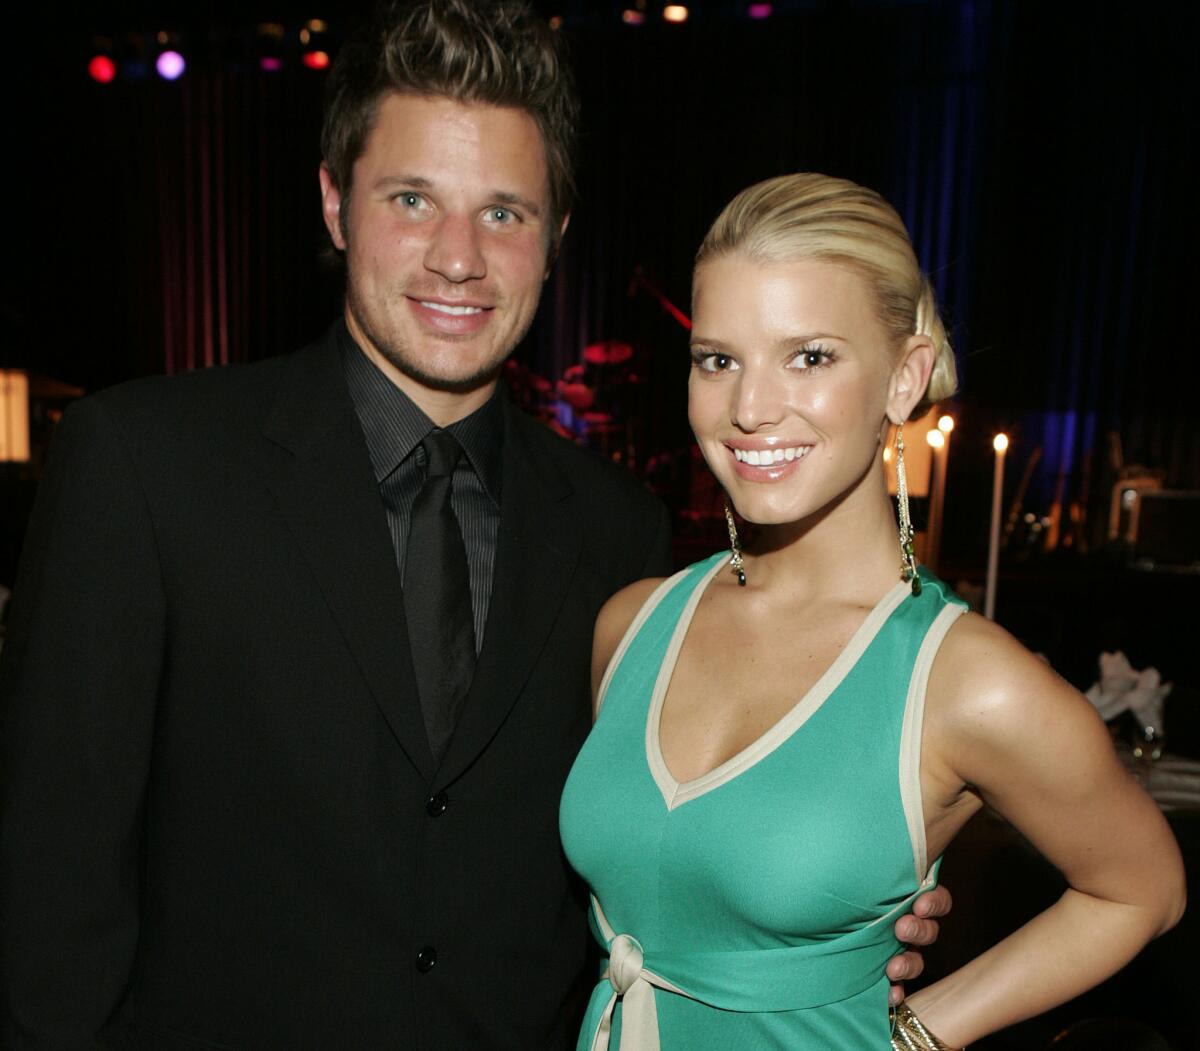 Formed "Newlyweds" Nick Lachey and Jessica Simpson in September 2004. The couple, who divorced in 2005, haven't spoken in six years, according to Lachey.